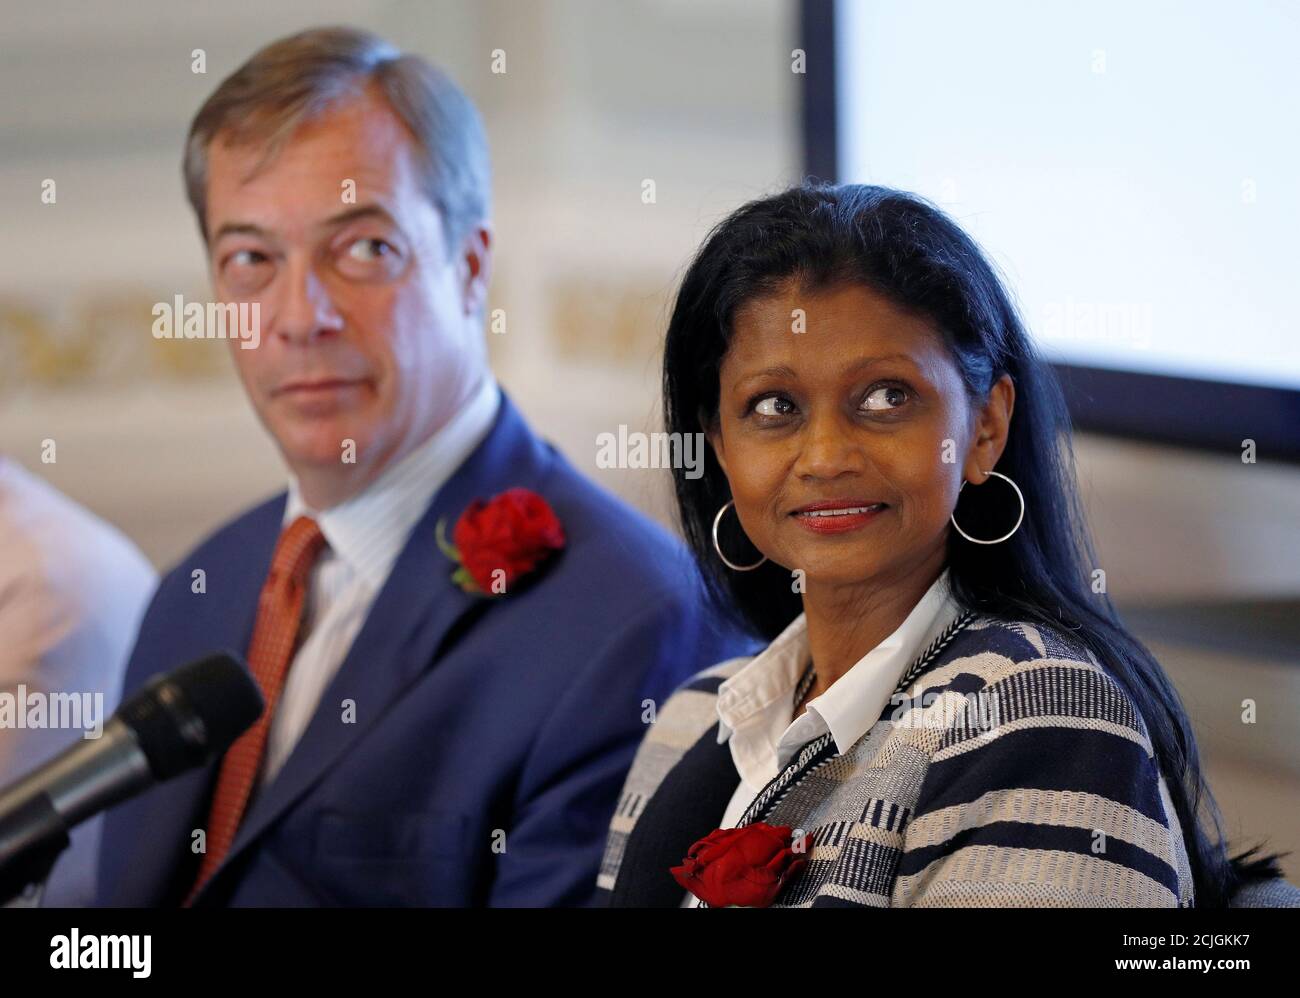 Brexit campaigner and Member of the European Parliament Nigel Farage and Christina Jordan, a candidate of Brexit party, look on during a news conference the 'Brexit Party' campaign for the European